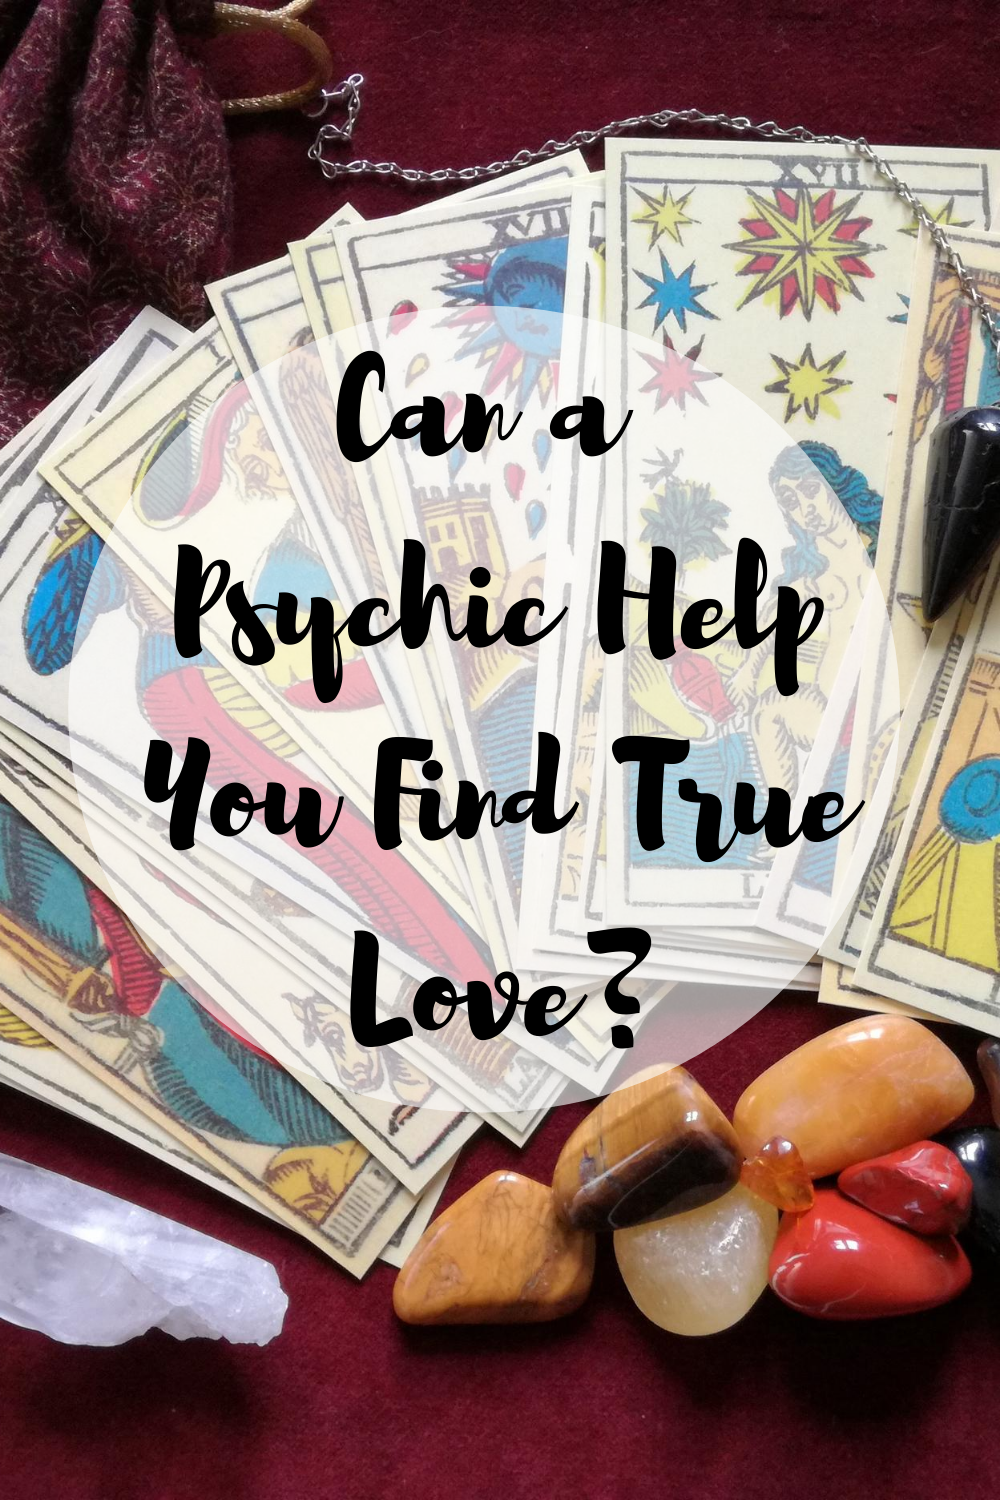 What is True Love? A Deeper Insight